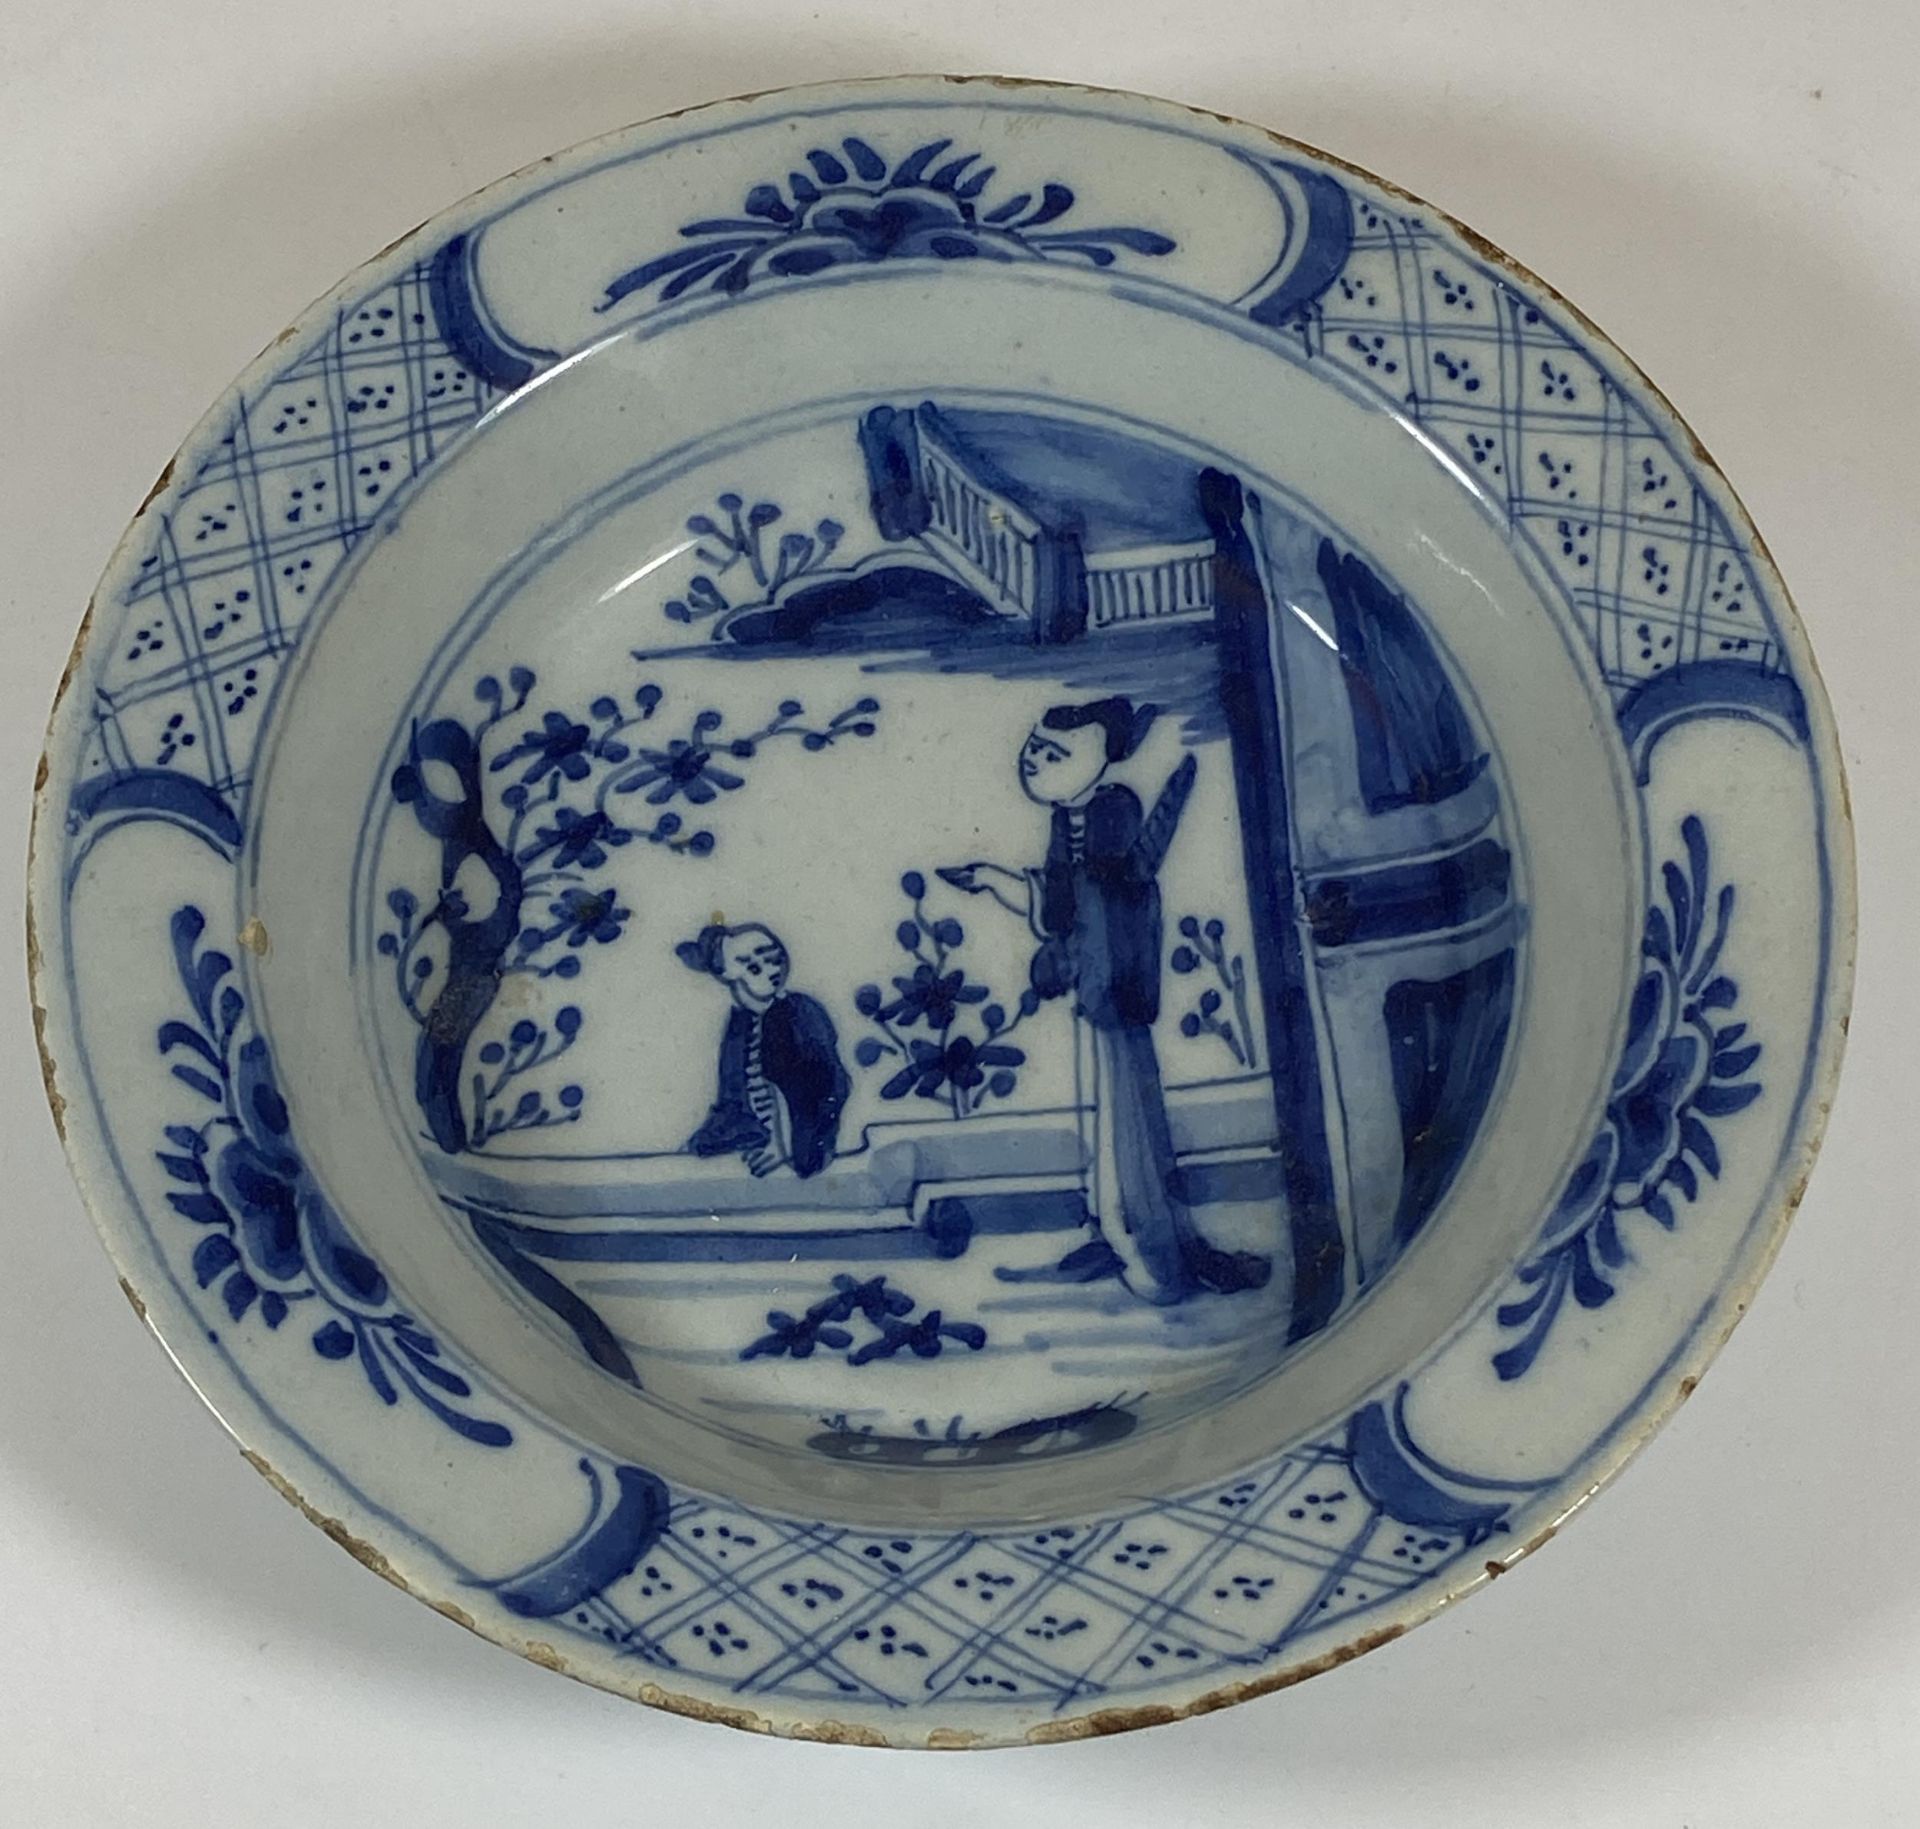 AN EARLY 19TH CENTURY DELFT ORIENTAL DESIGN BLUE AND WHITE PORCELAIN PLATE, DIAMETER 16.5CM